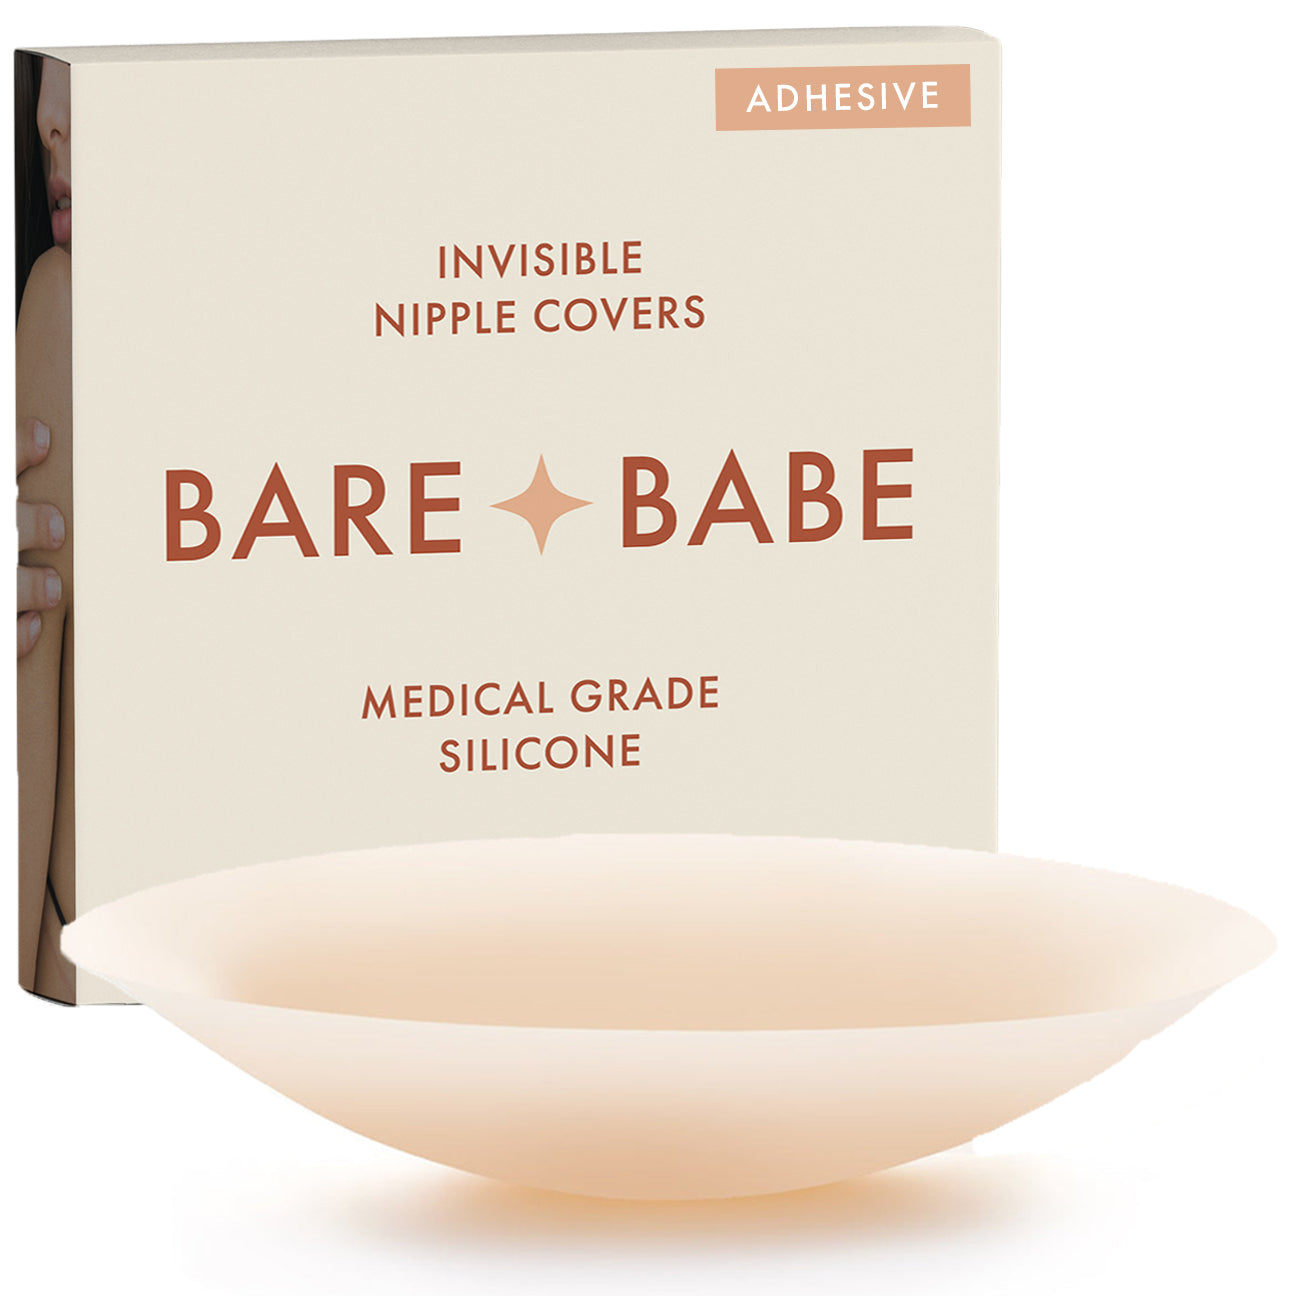 Bare Babe Adhesive Nipple Cover in Creme